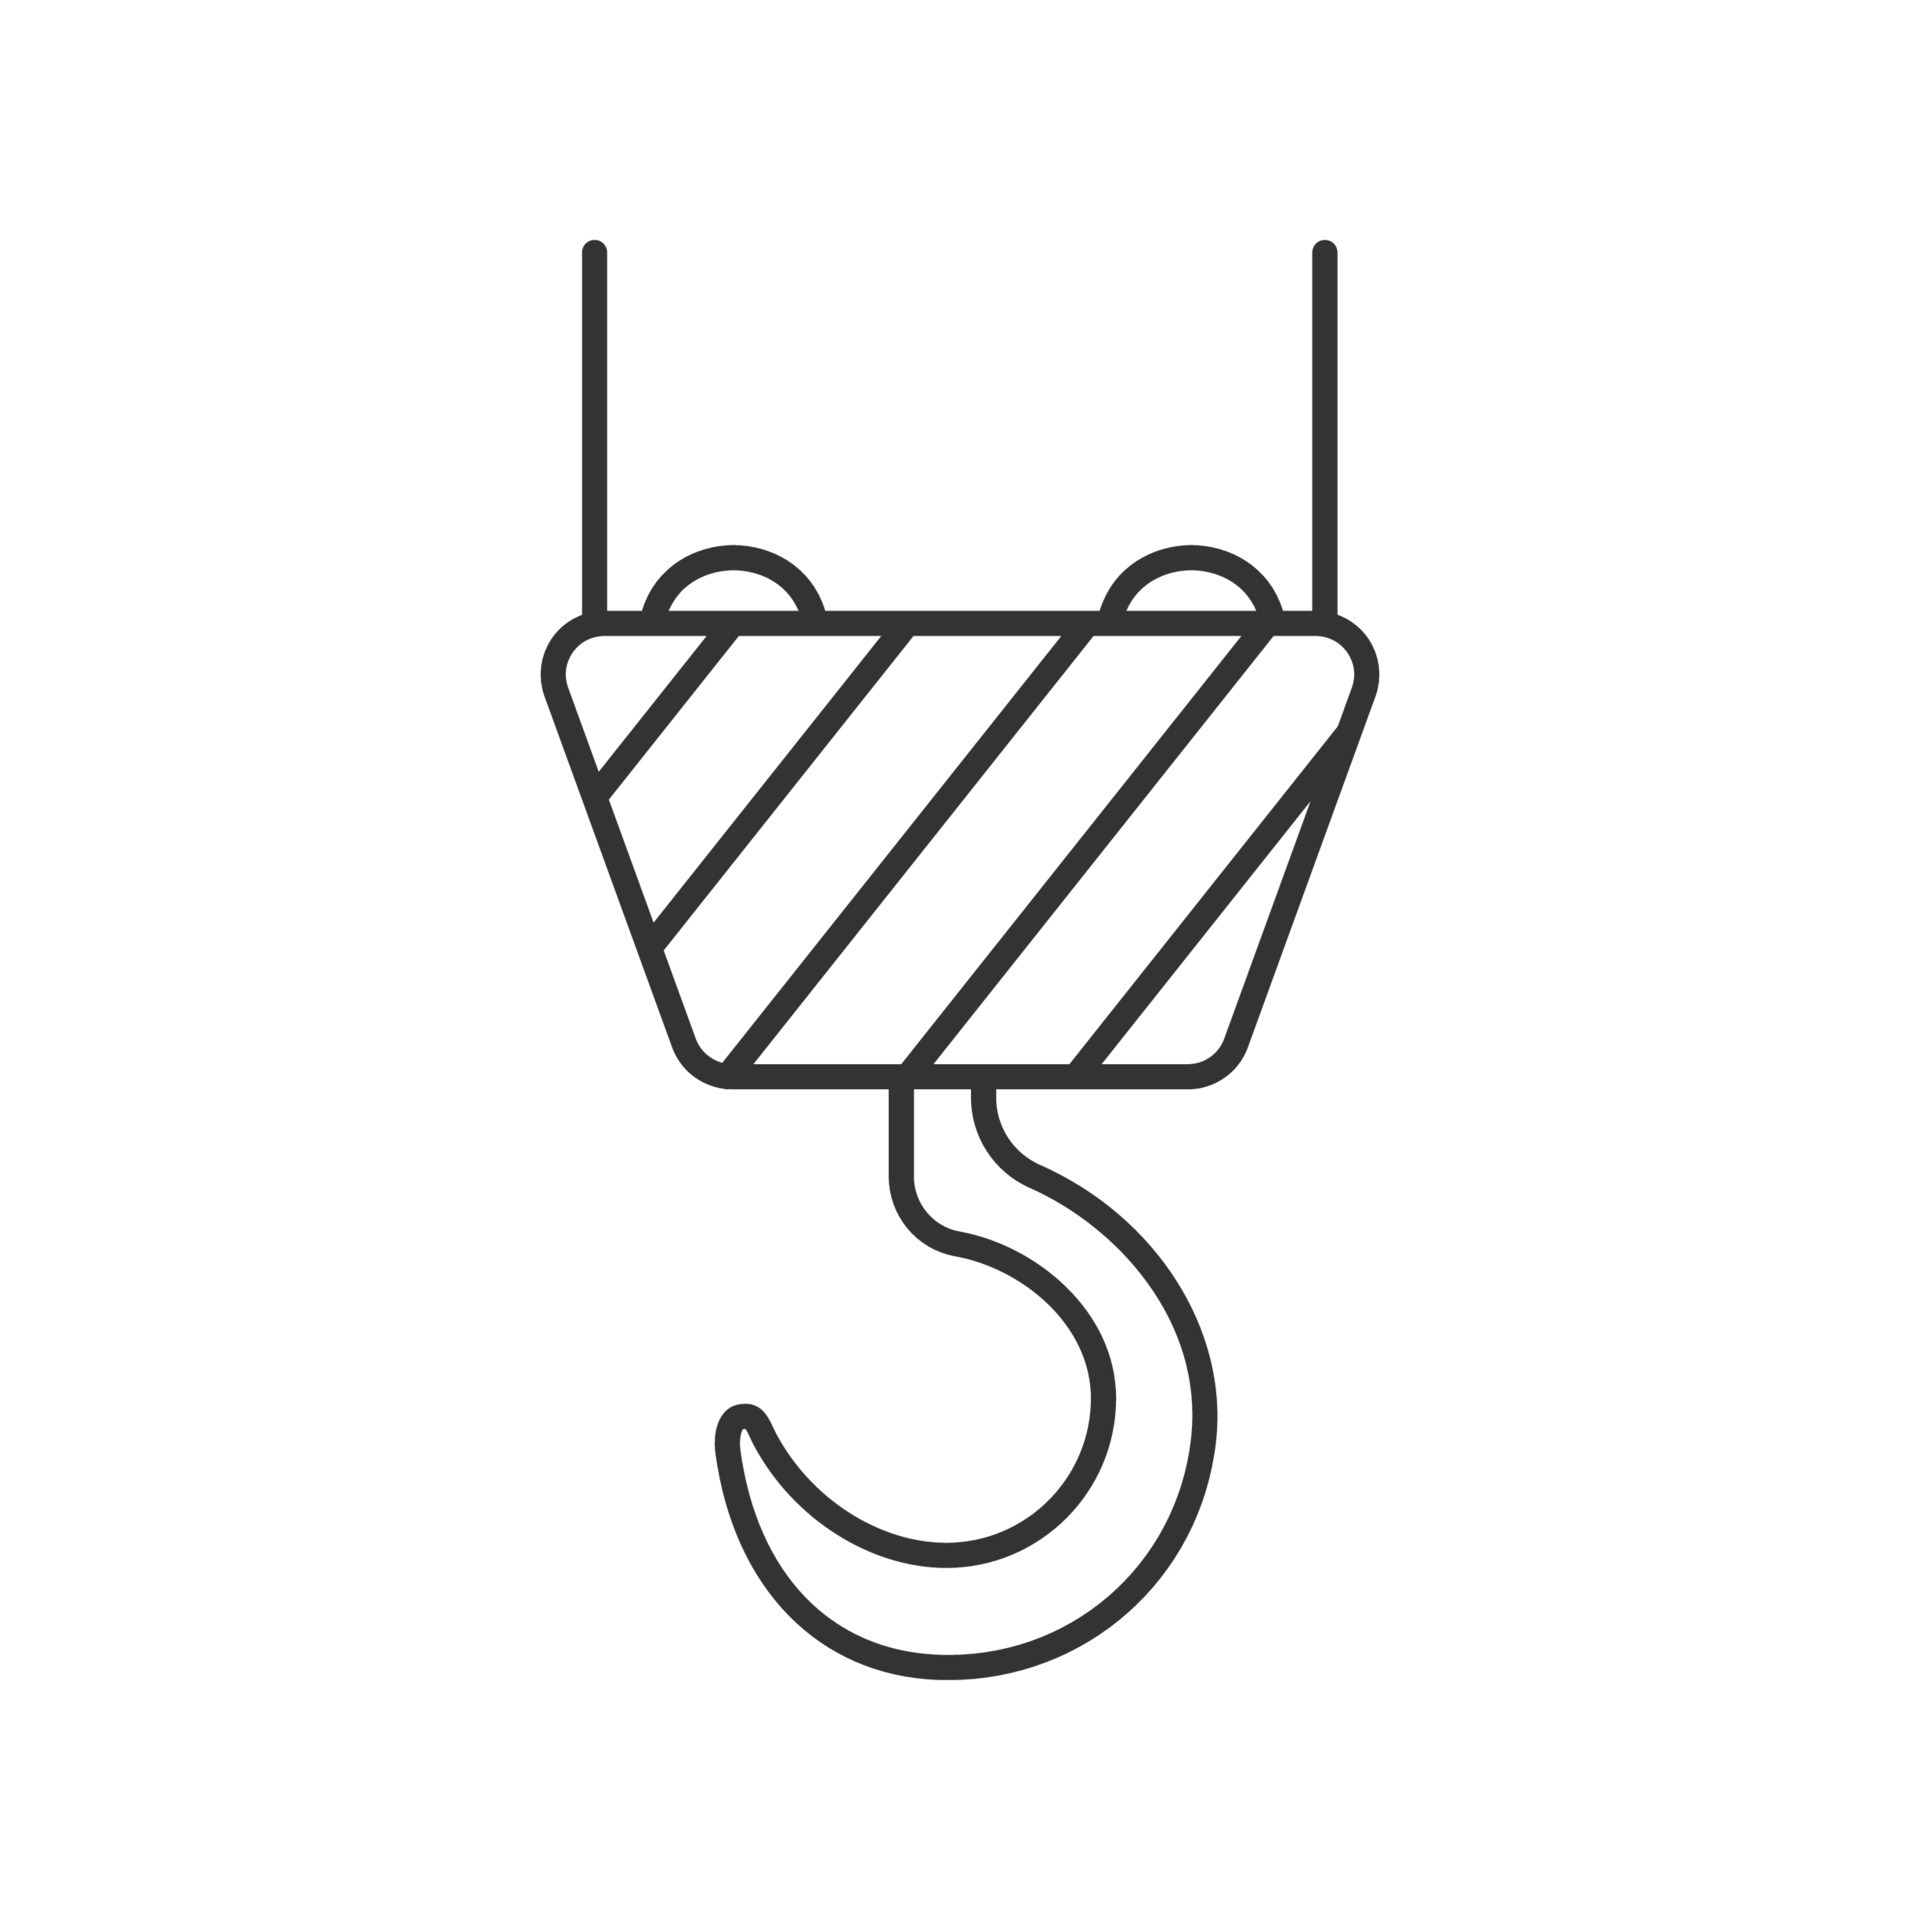 Cargo crane hook linear icon. Thin line illustration. Wire rope